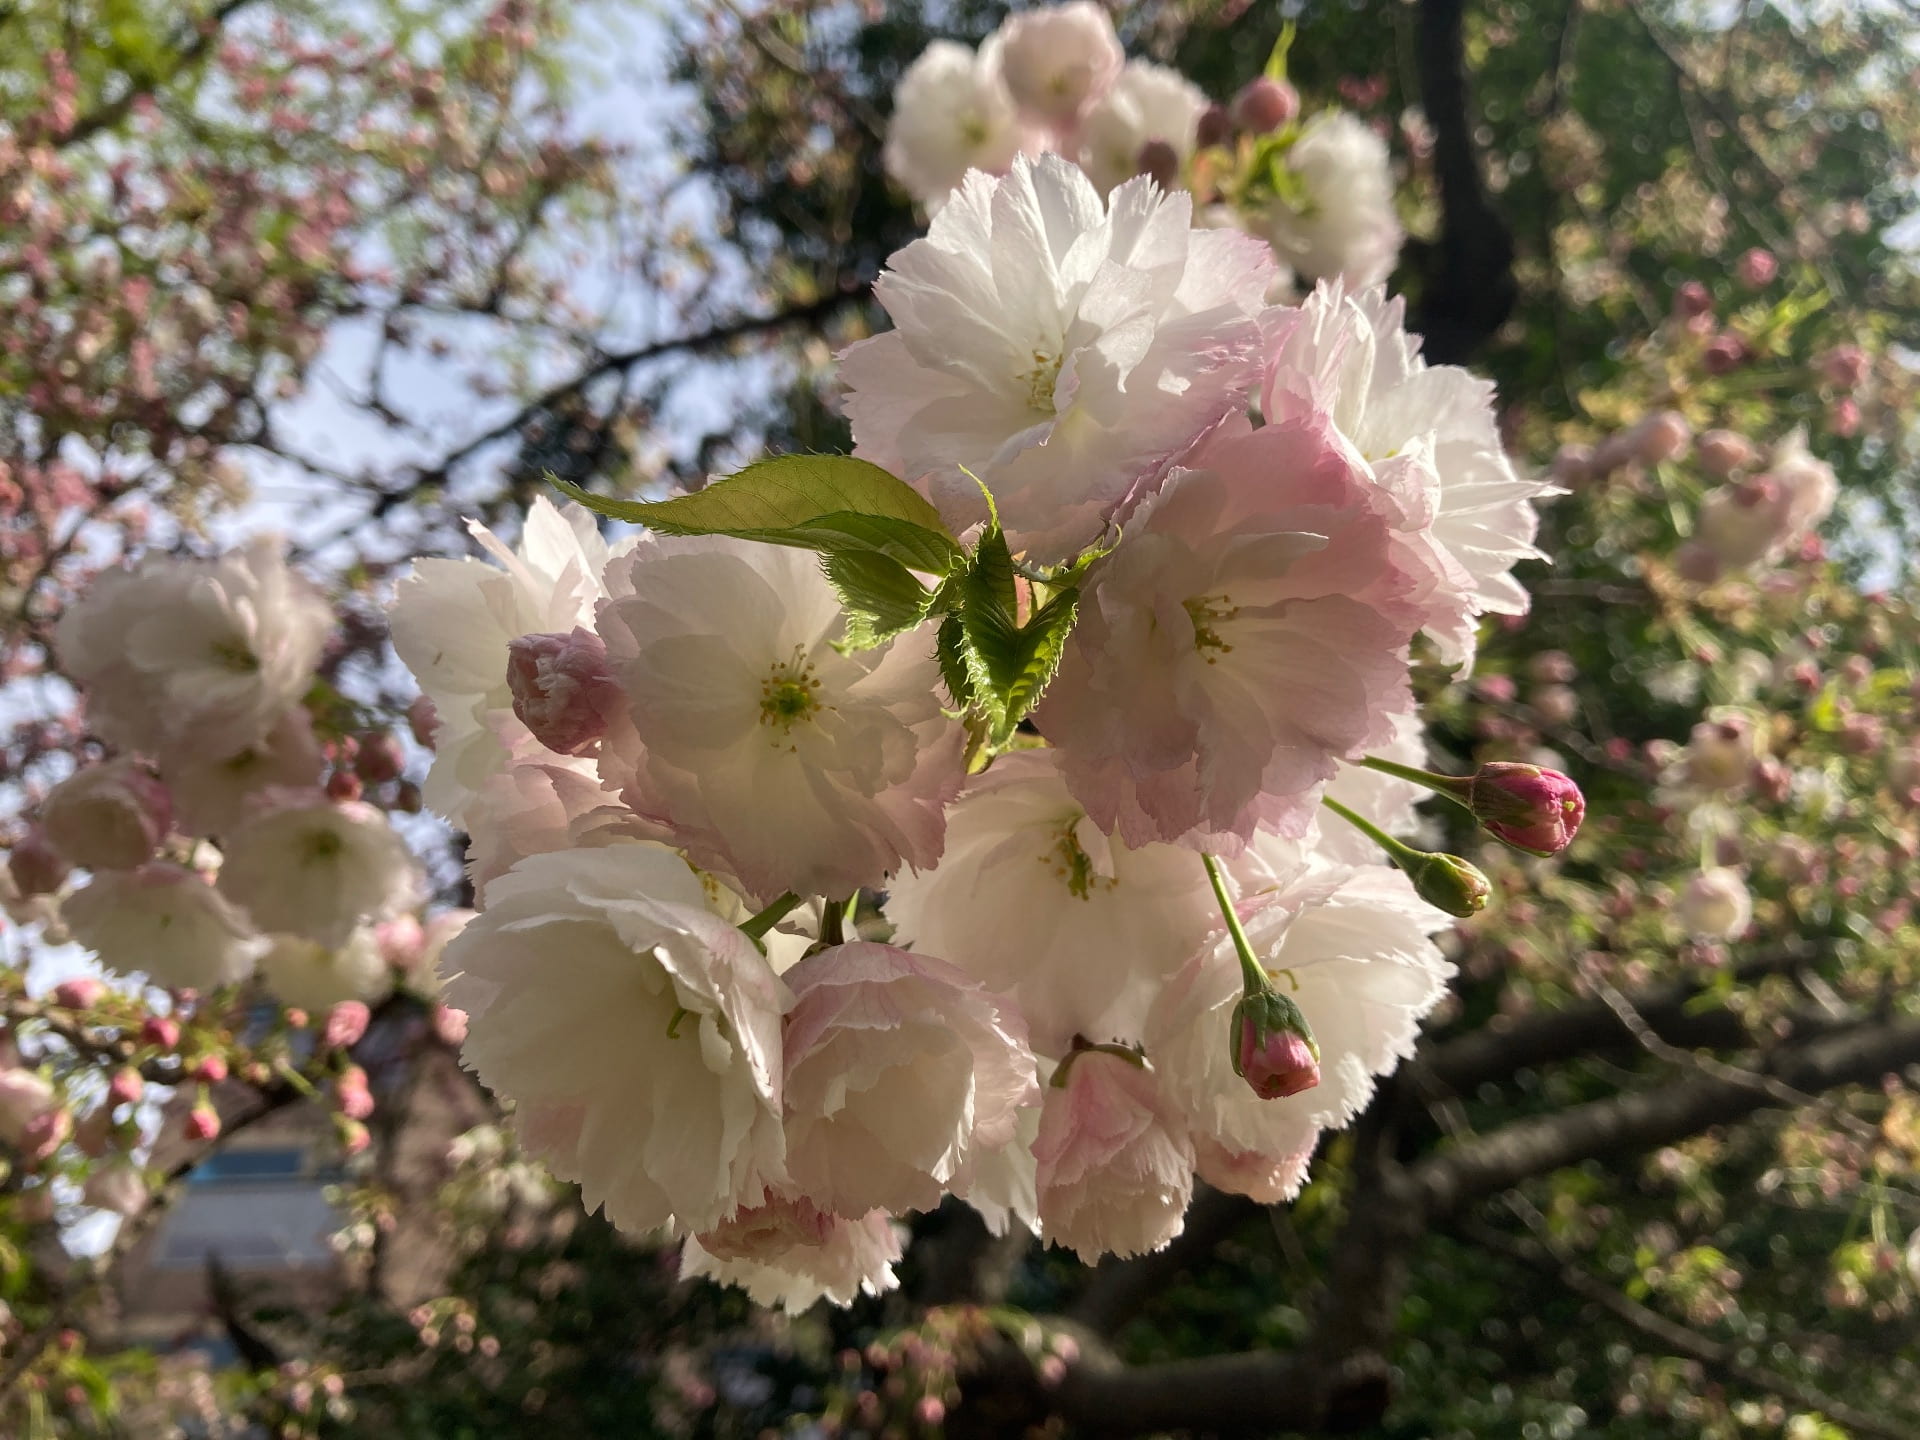 Prunus 'Ichiyo' produces fluffy, candy colored flowers.